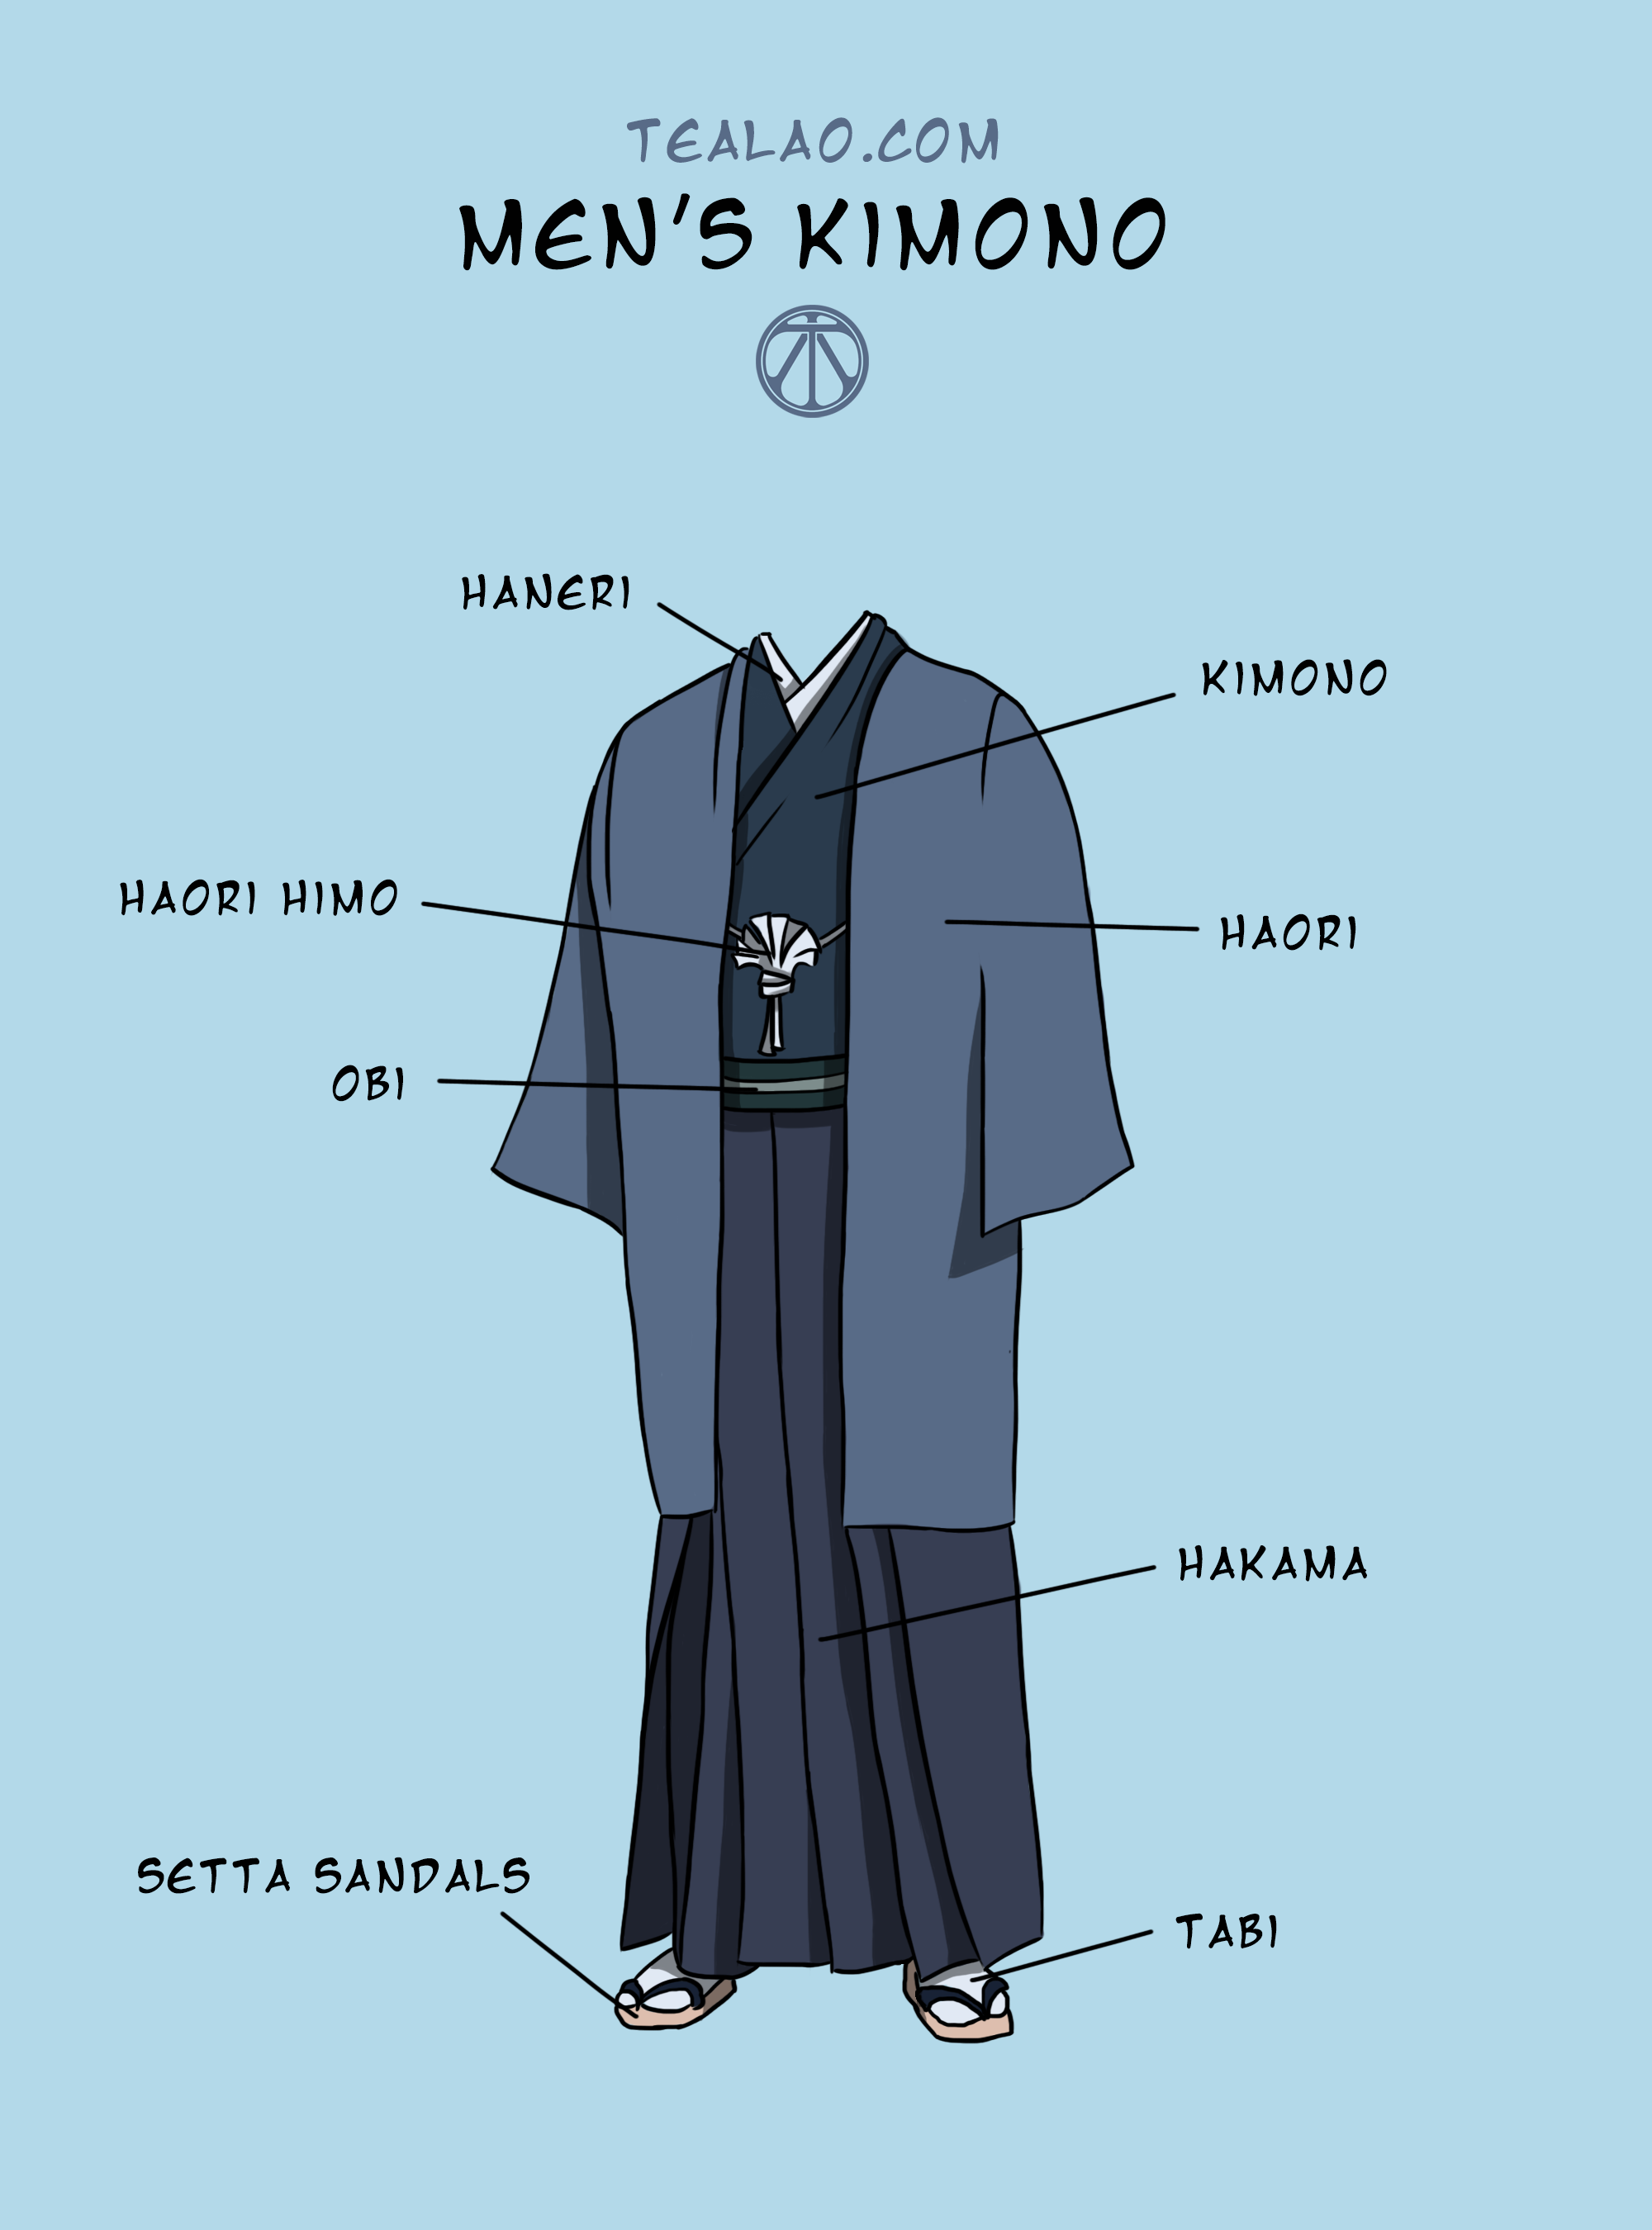 How To Wear Kimono For Men | vlr.eng.br